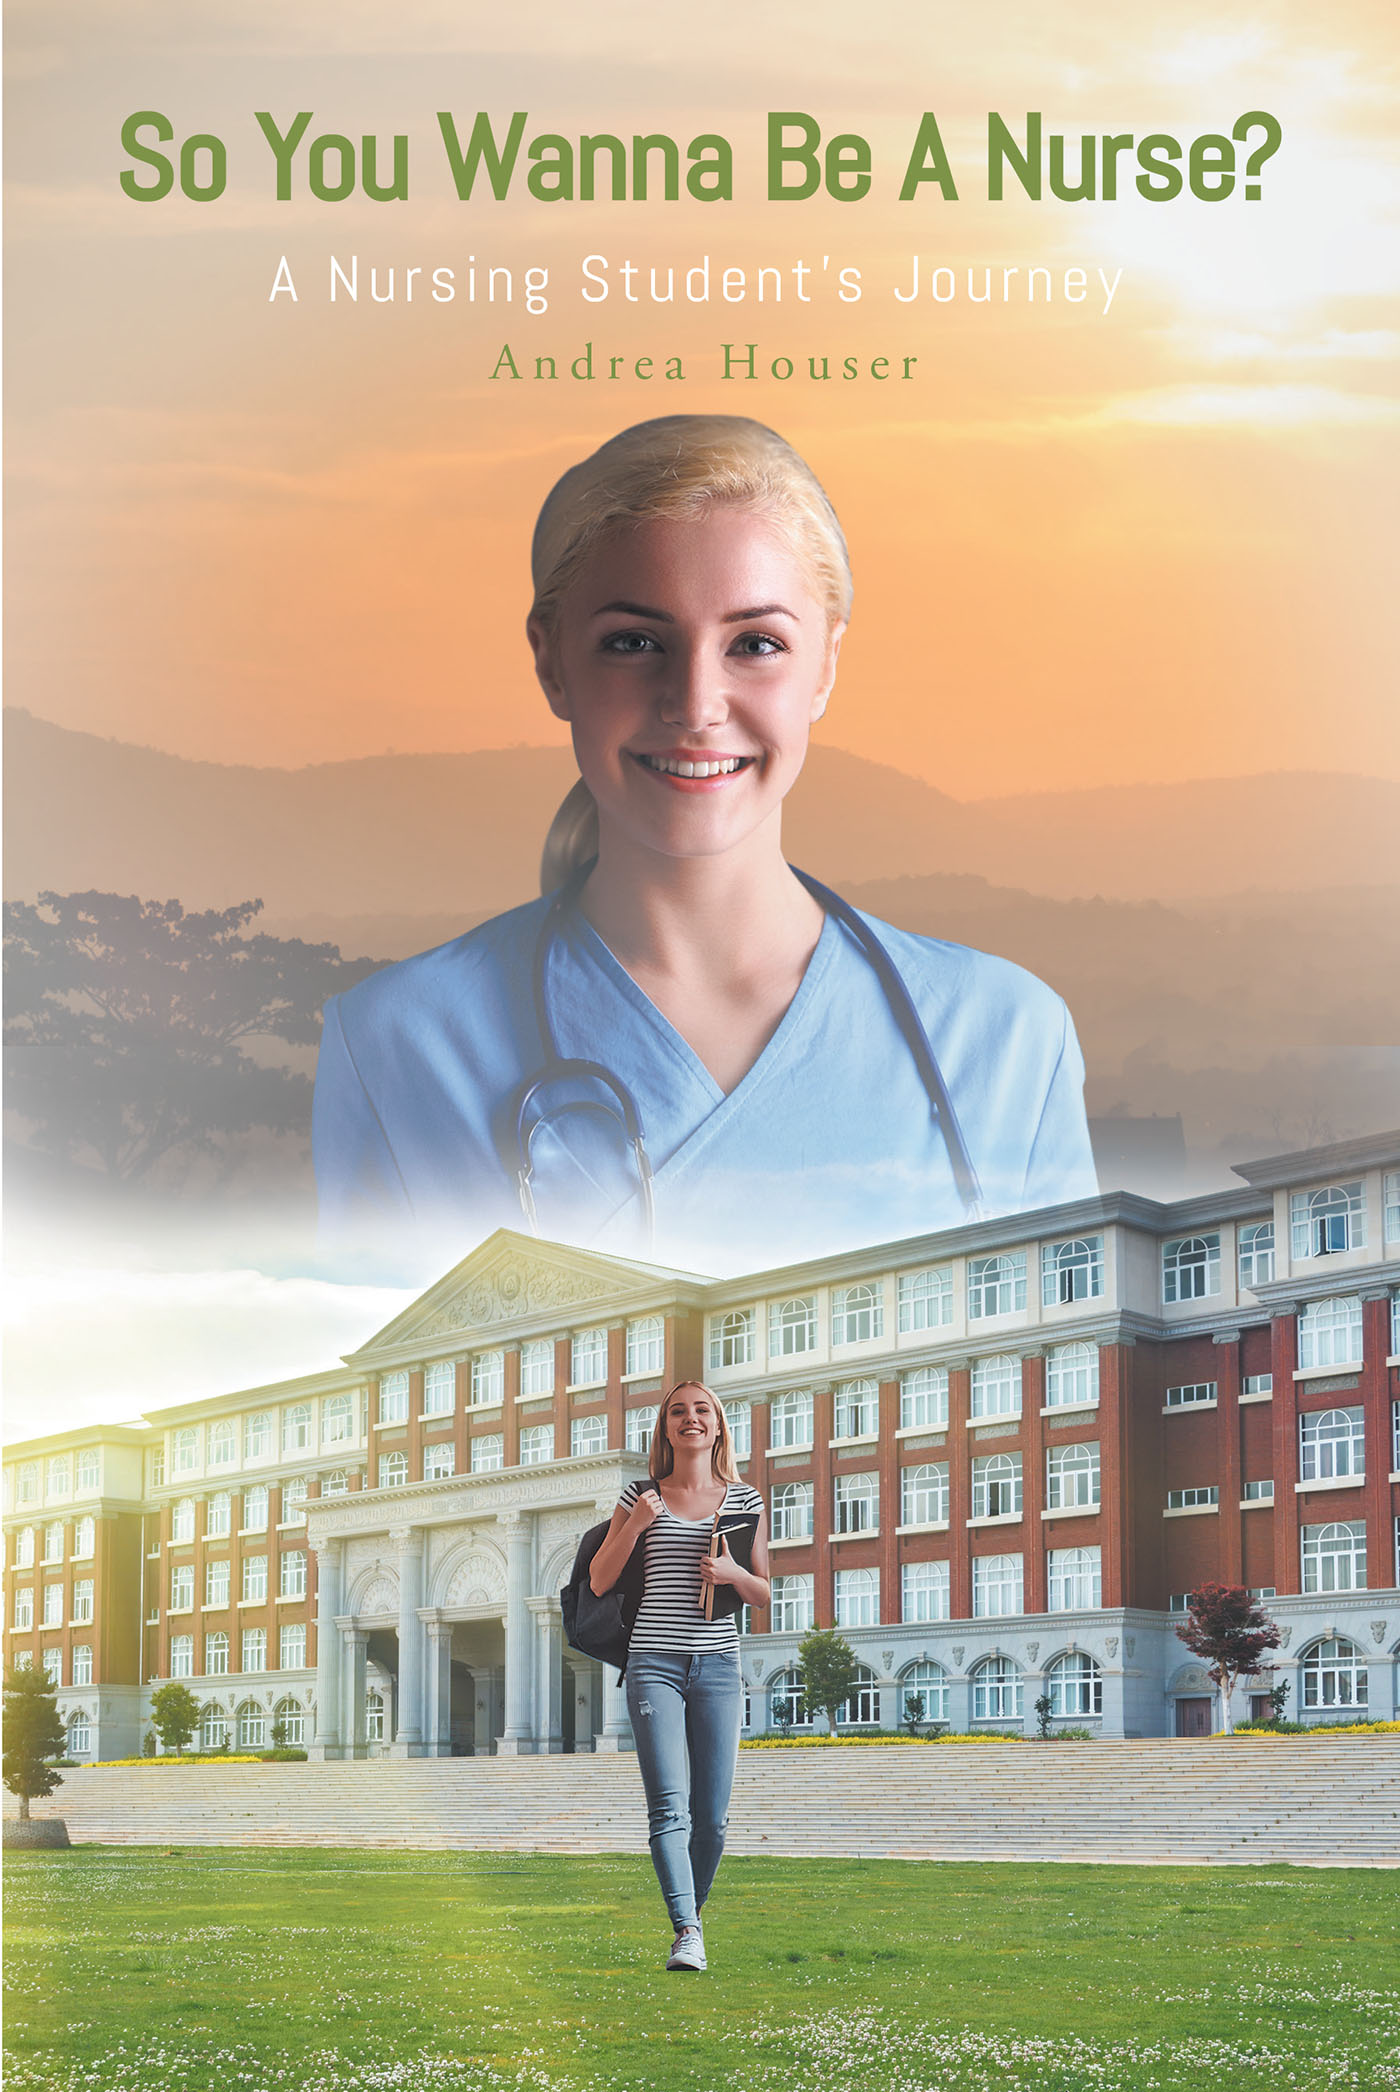 Andrea Houser’s Newly Released “So You Wanna Be A Nurse?” is a Compelling Fiction That Will Have Readers Racing to See What Awaits a Lost Young Woman